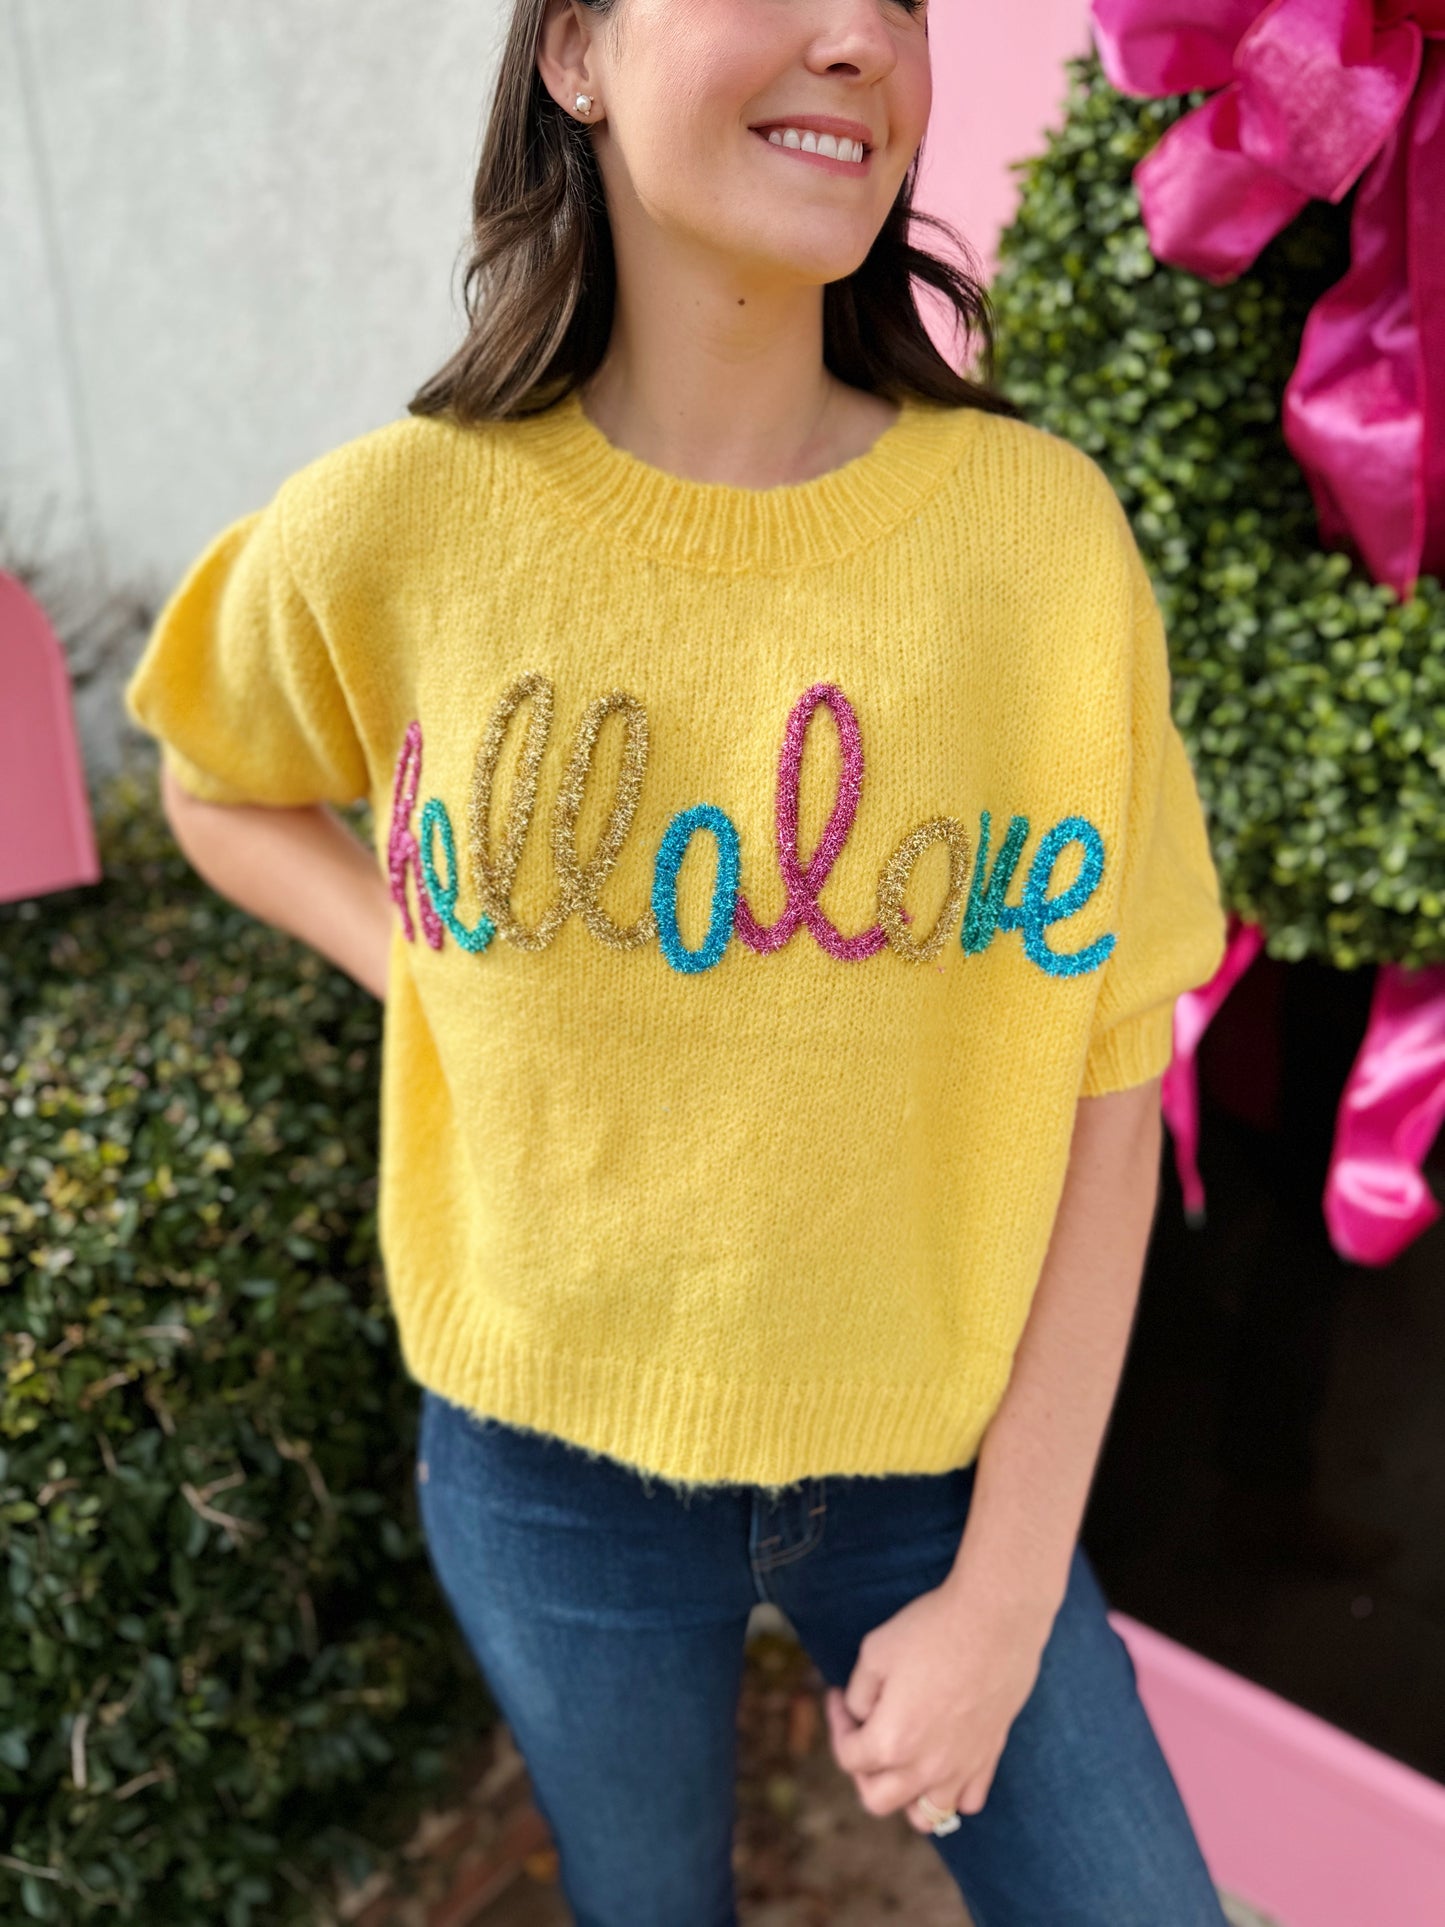 Hello Love Tinsel Sweater, short sleeve sweater with different colored tinsel that says “hello love” 